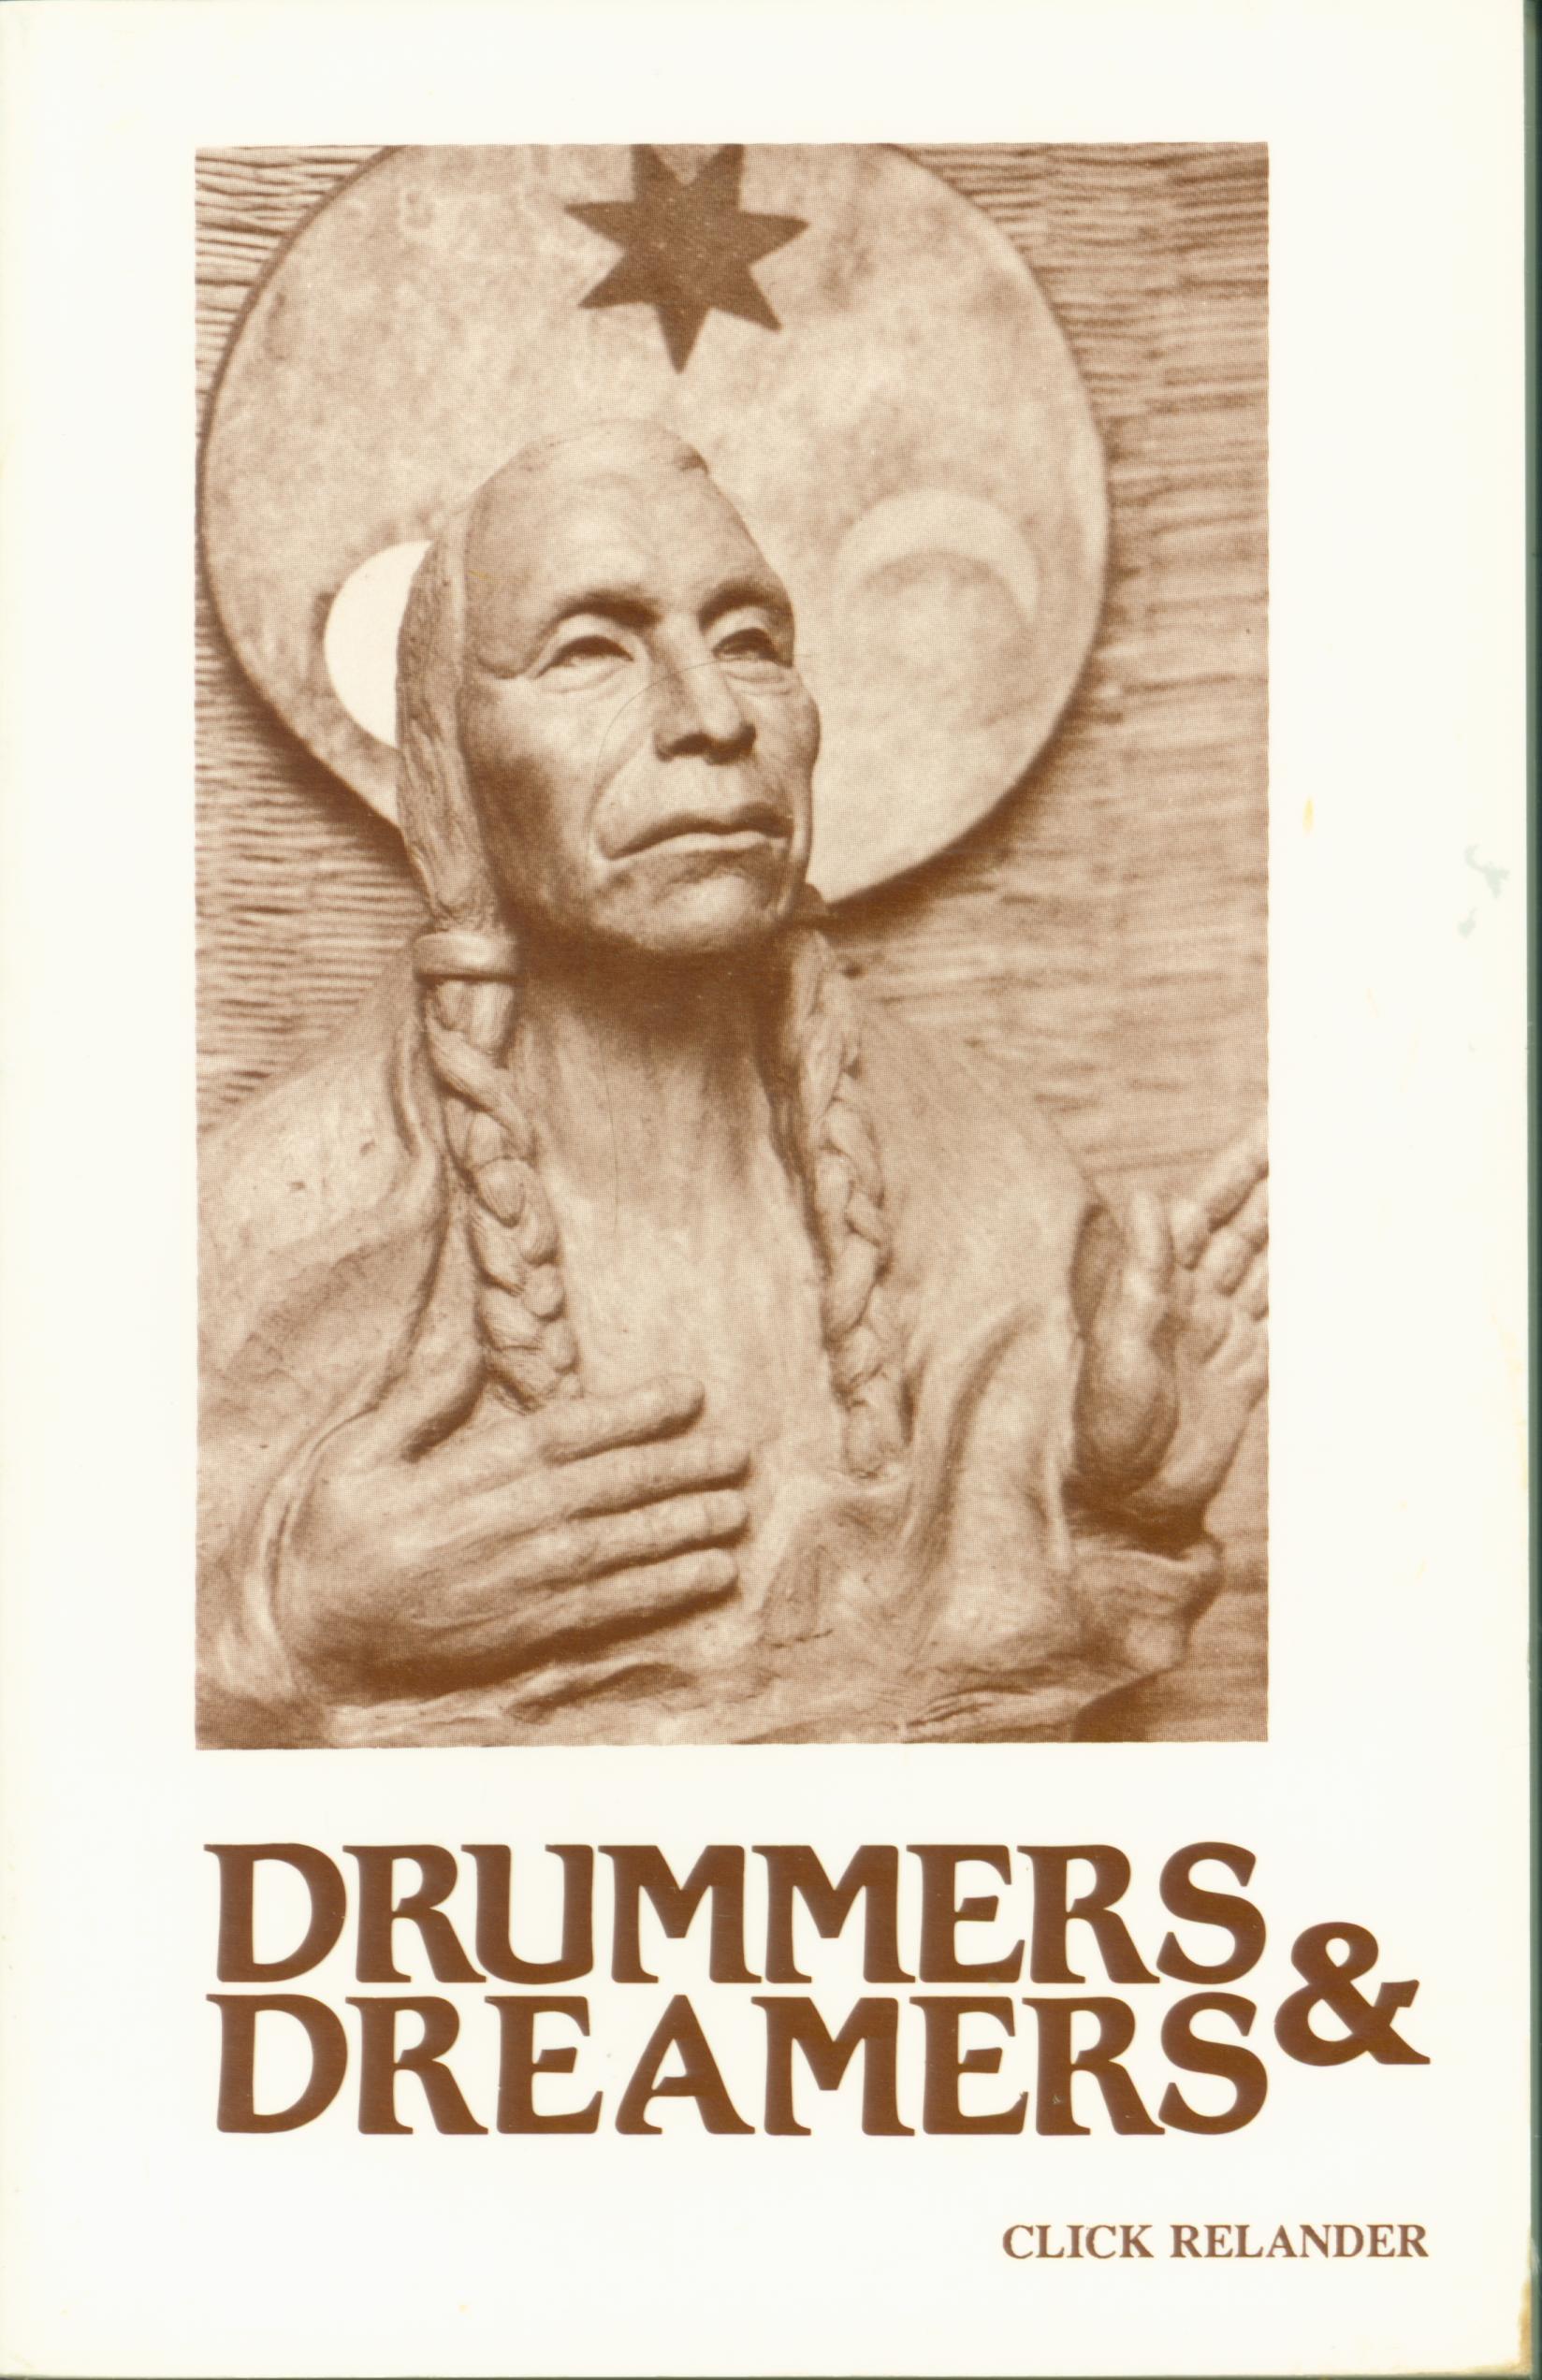 DRUMMERS AND DREAMERS